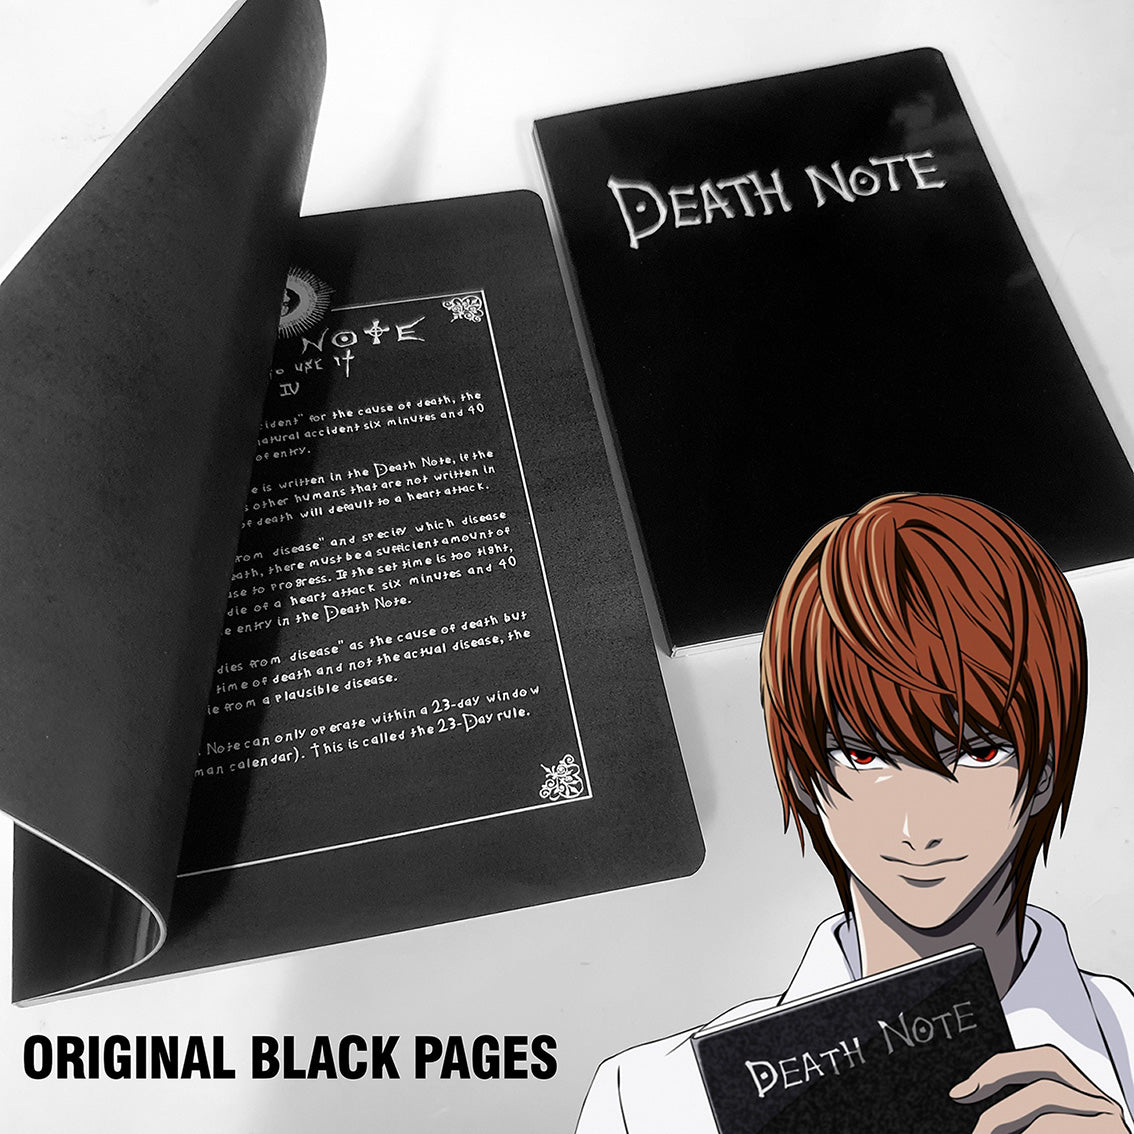 Death Note Cosplay Notebook and Feather pen with Quotes of Characters